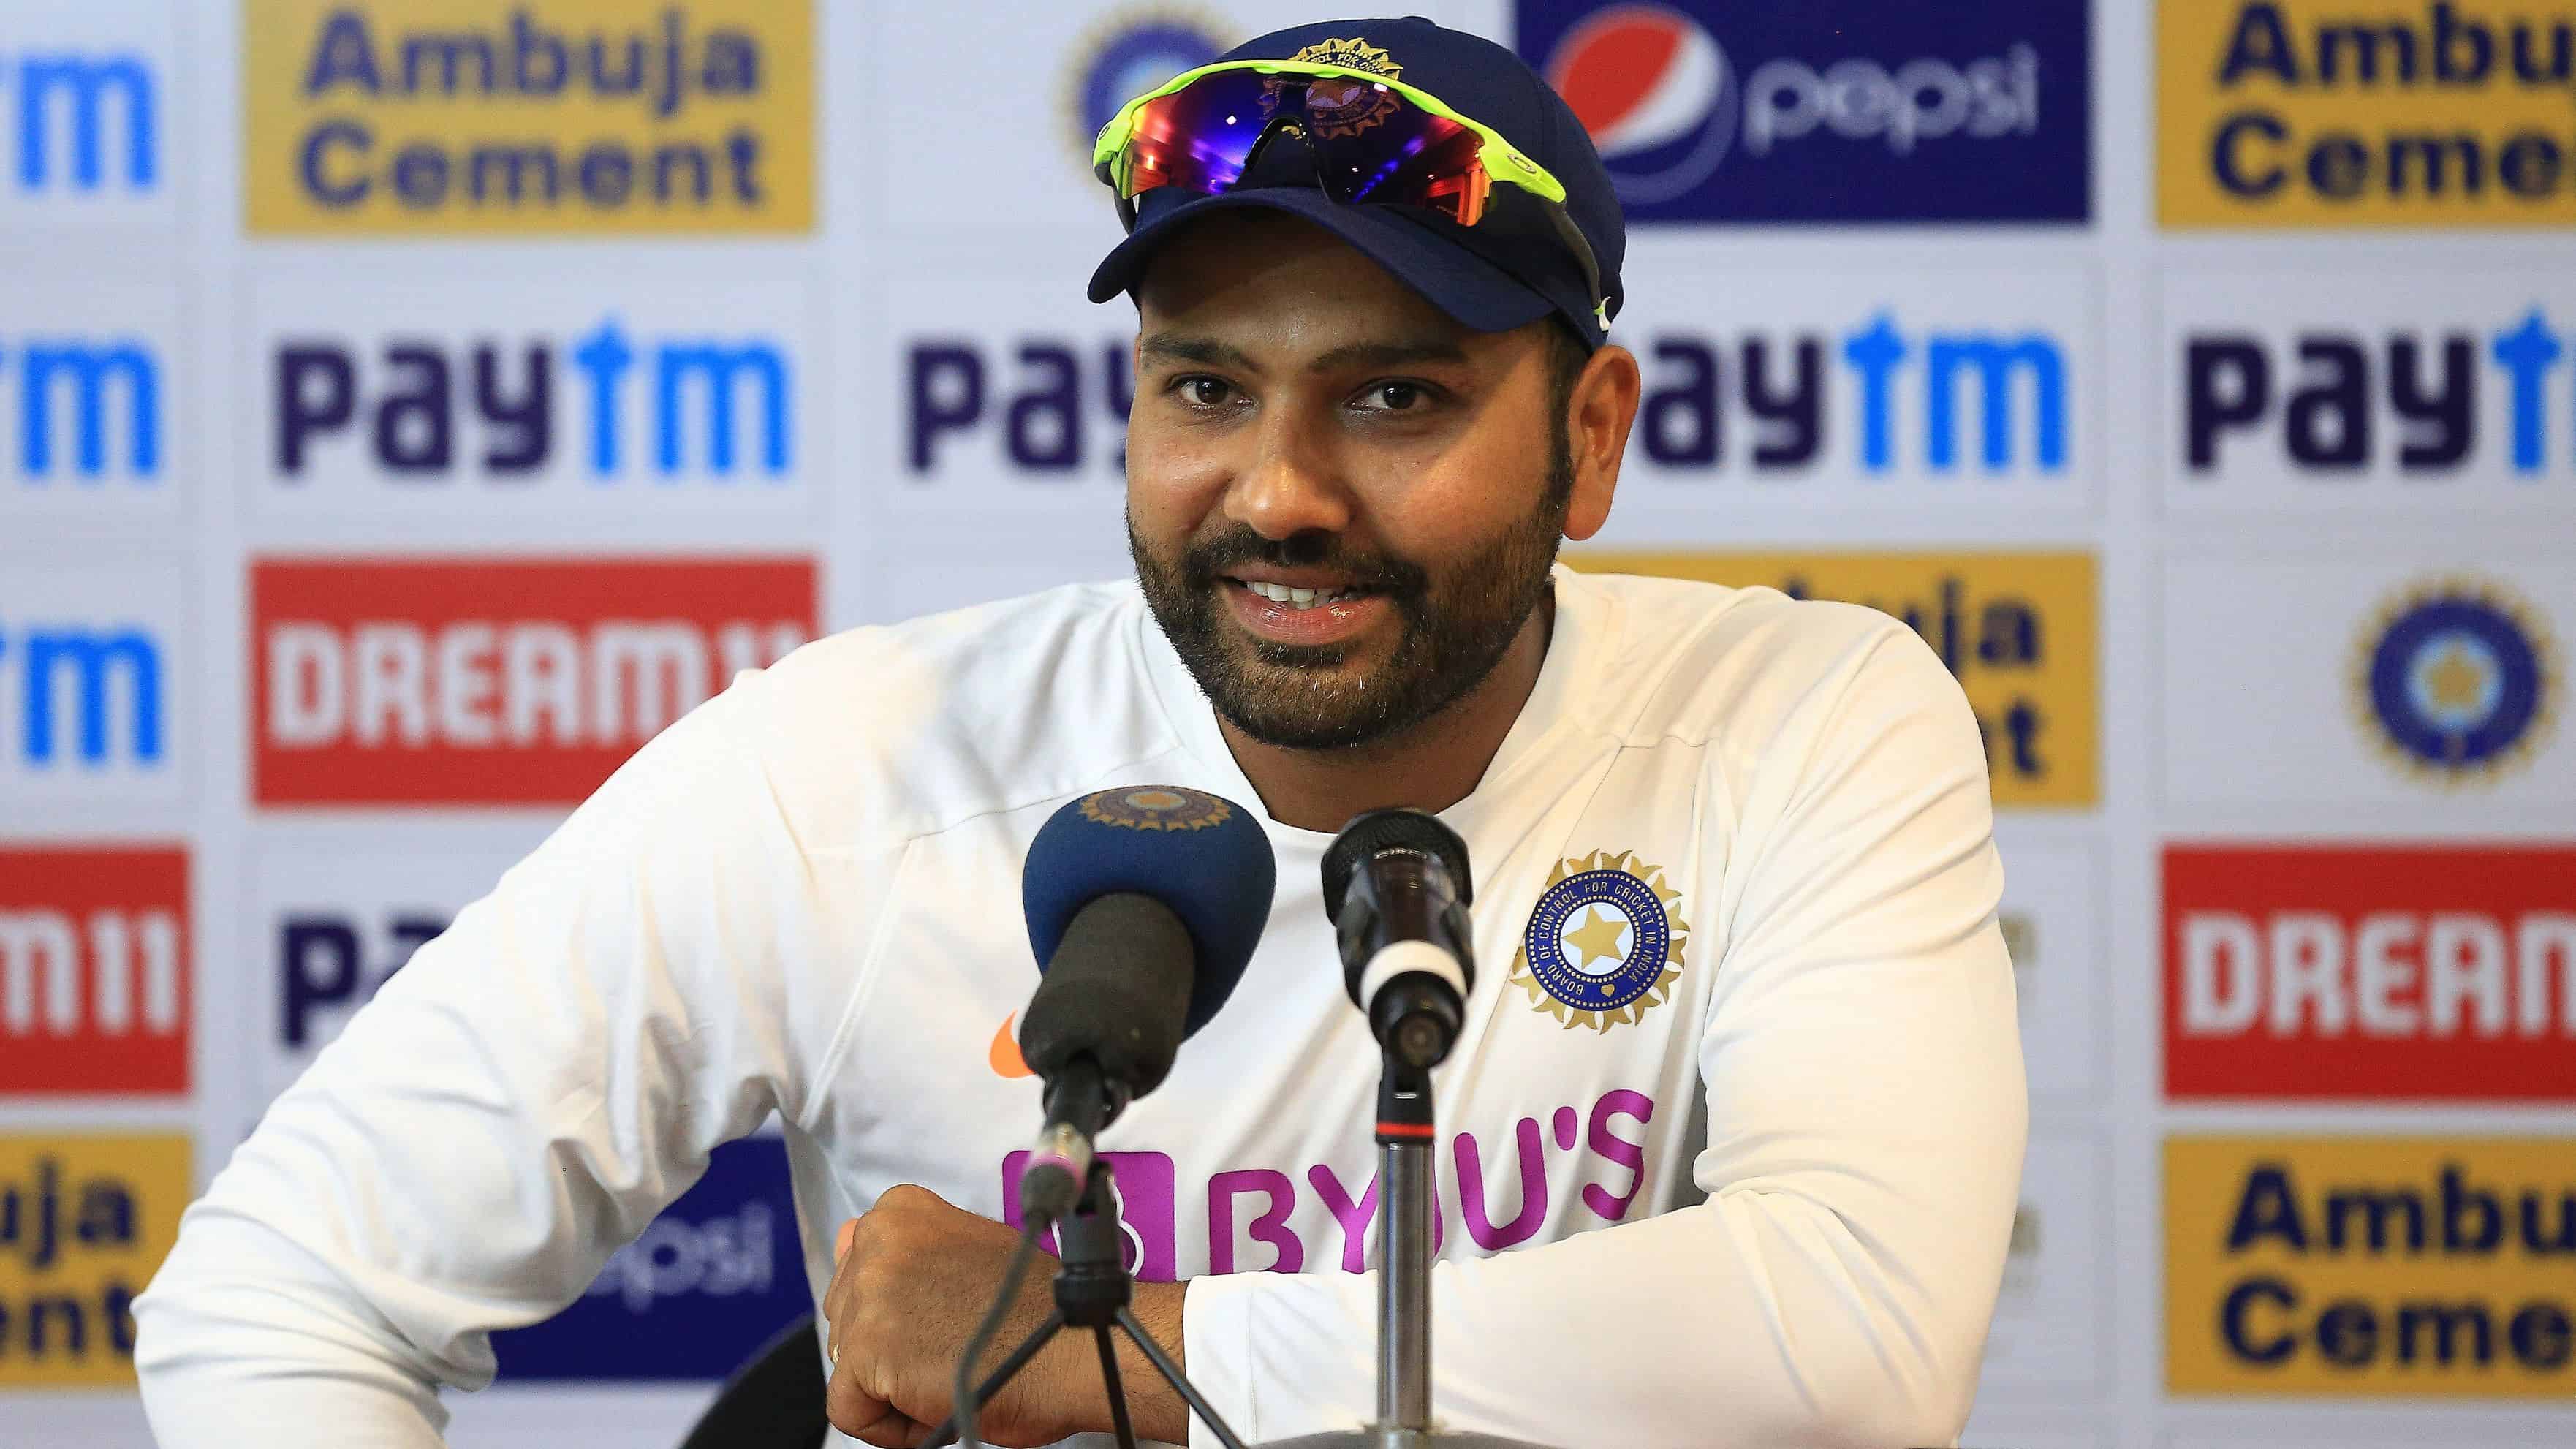 ‘Don’t Want To Be Too Critical’ - Rohit Sharma On India’s Performance vs SA